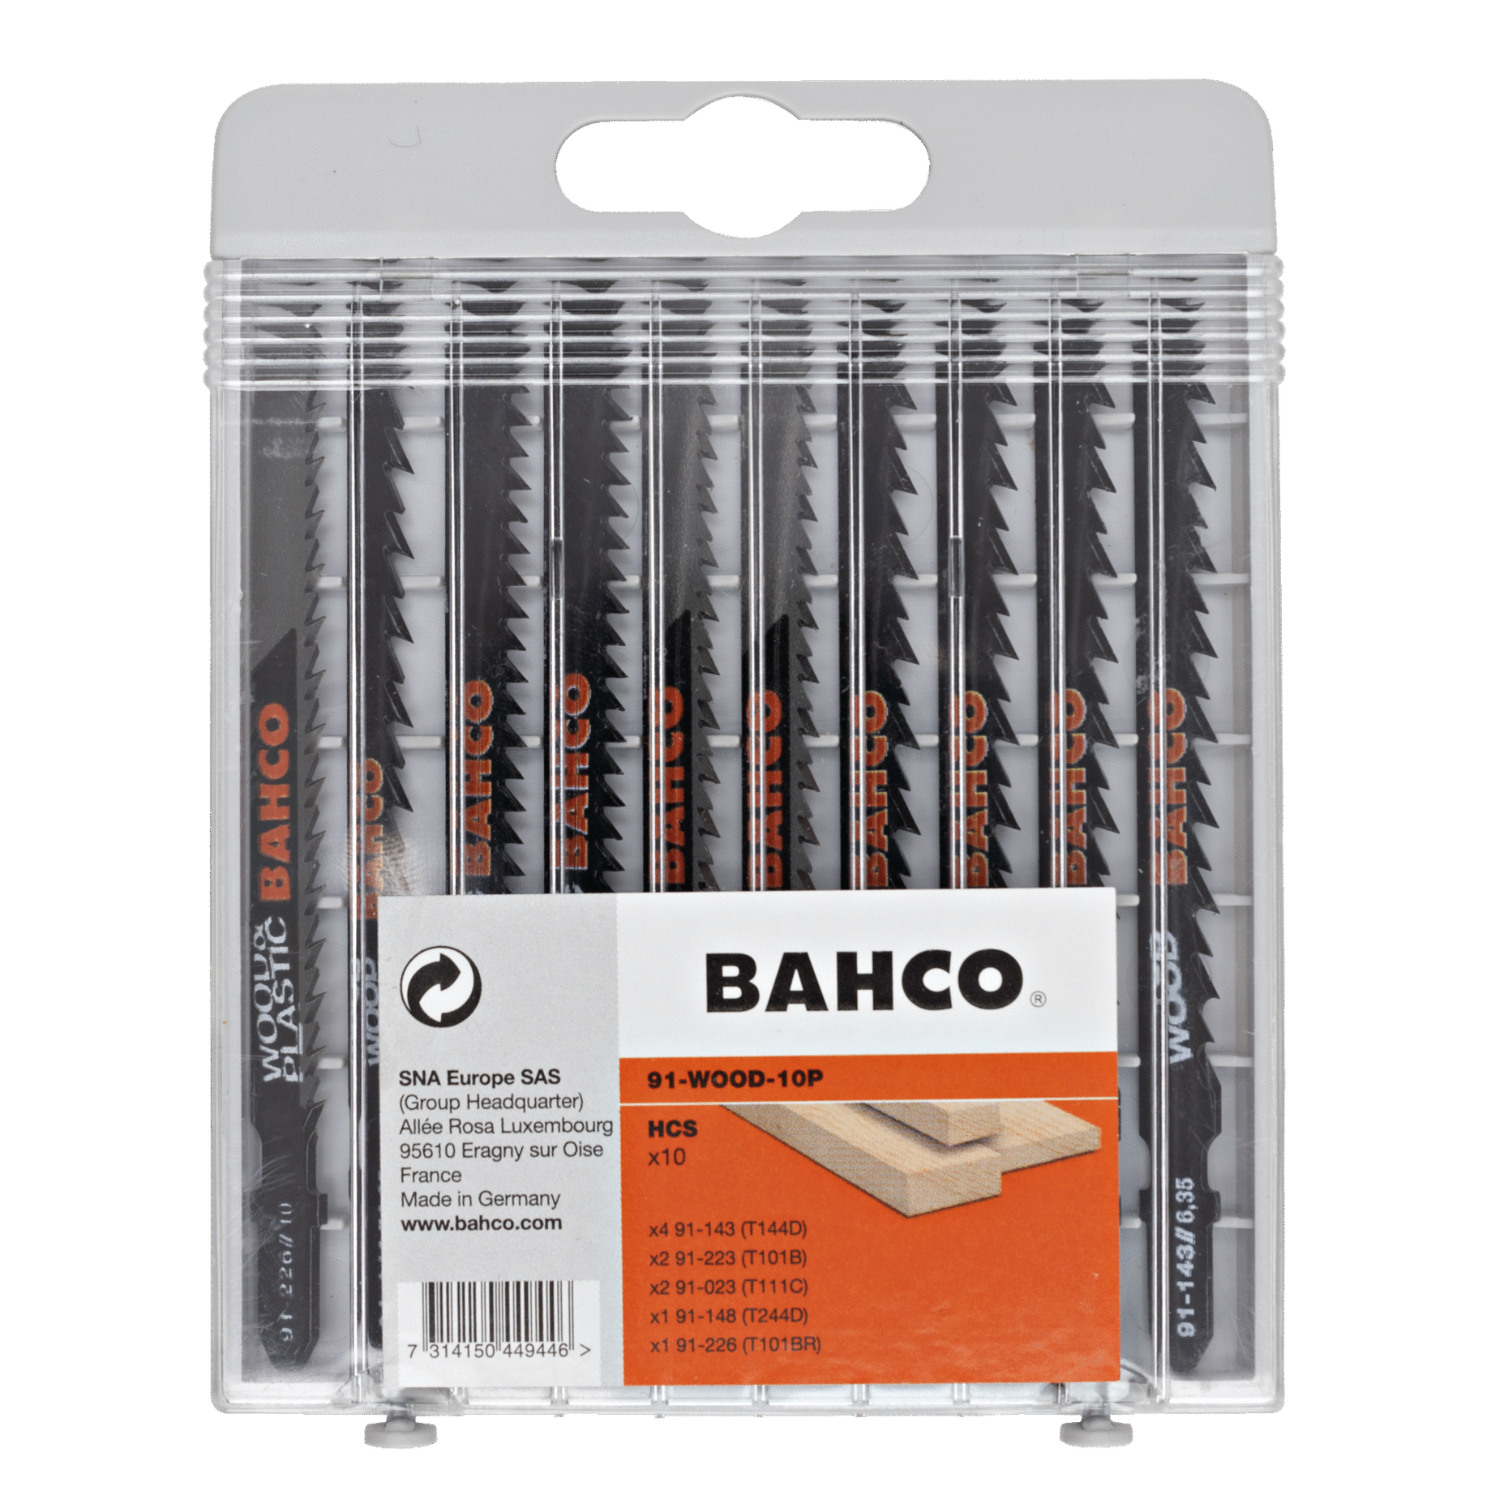 BAHCO 91-WOOD-10P Jigsaw Blade Set Or Wood And Plastic - 10 Pcs - Premium Jigsaw Blade from BAHCO - Shop now at Yew Aik.